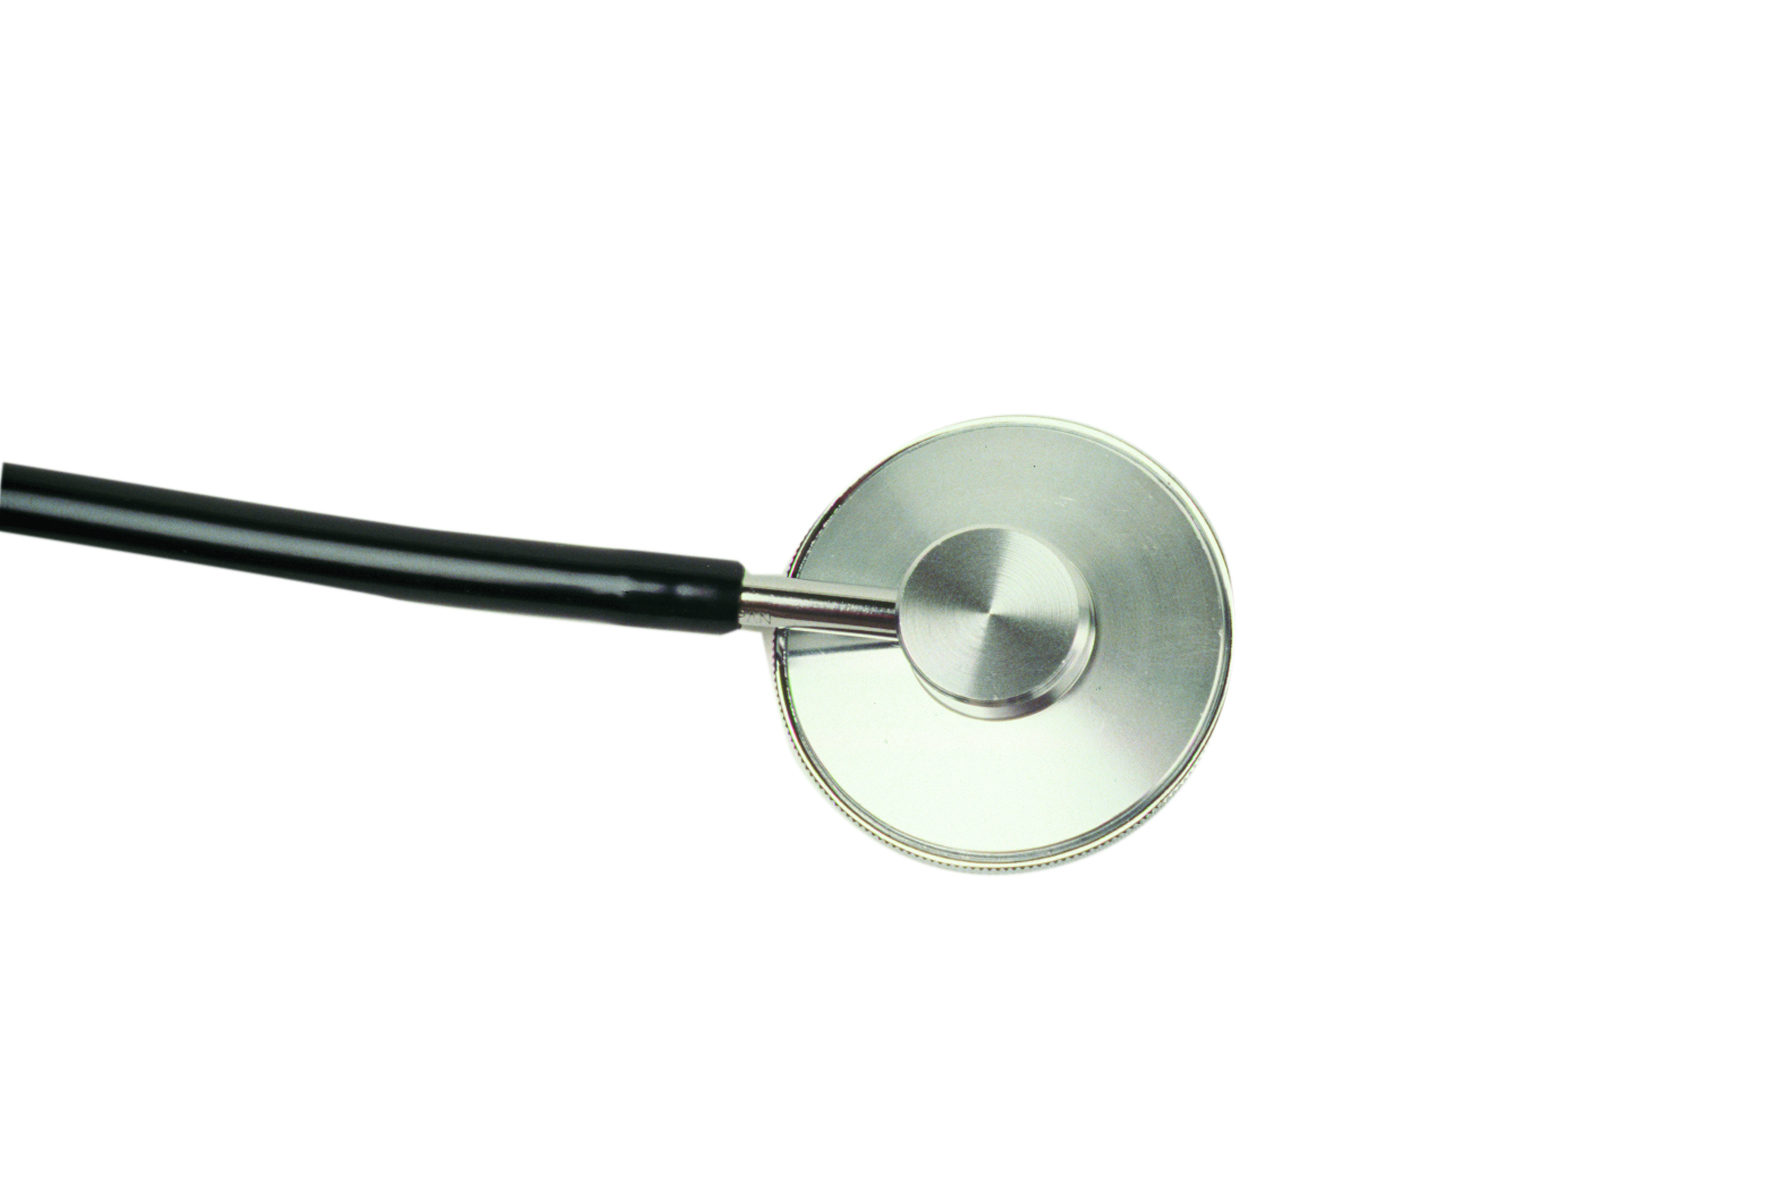 Dual head Stainless Steel Stethoscope with 18" Black Tubing